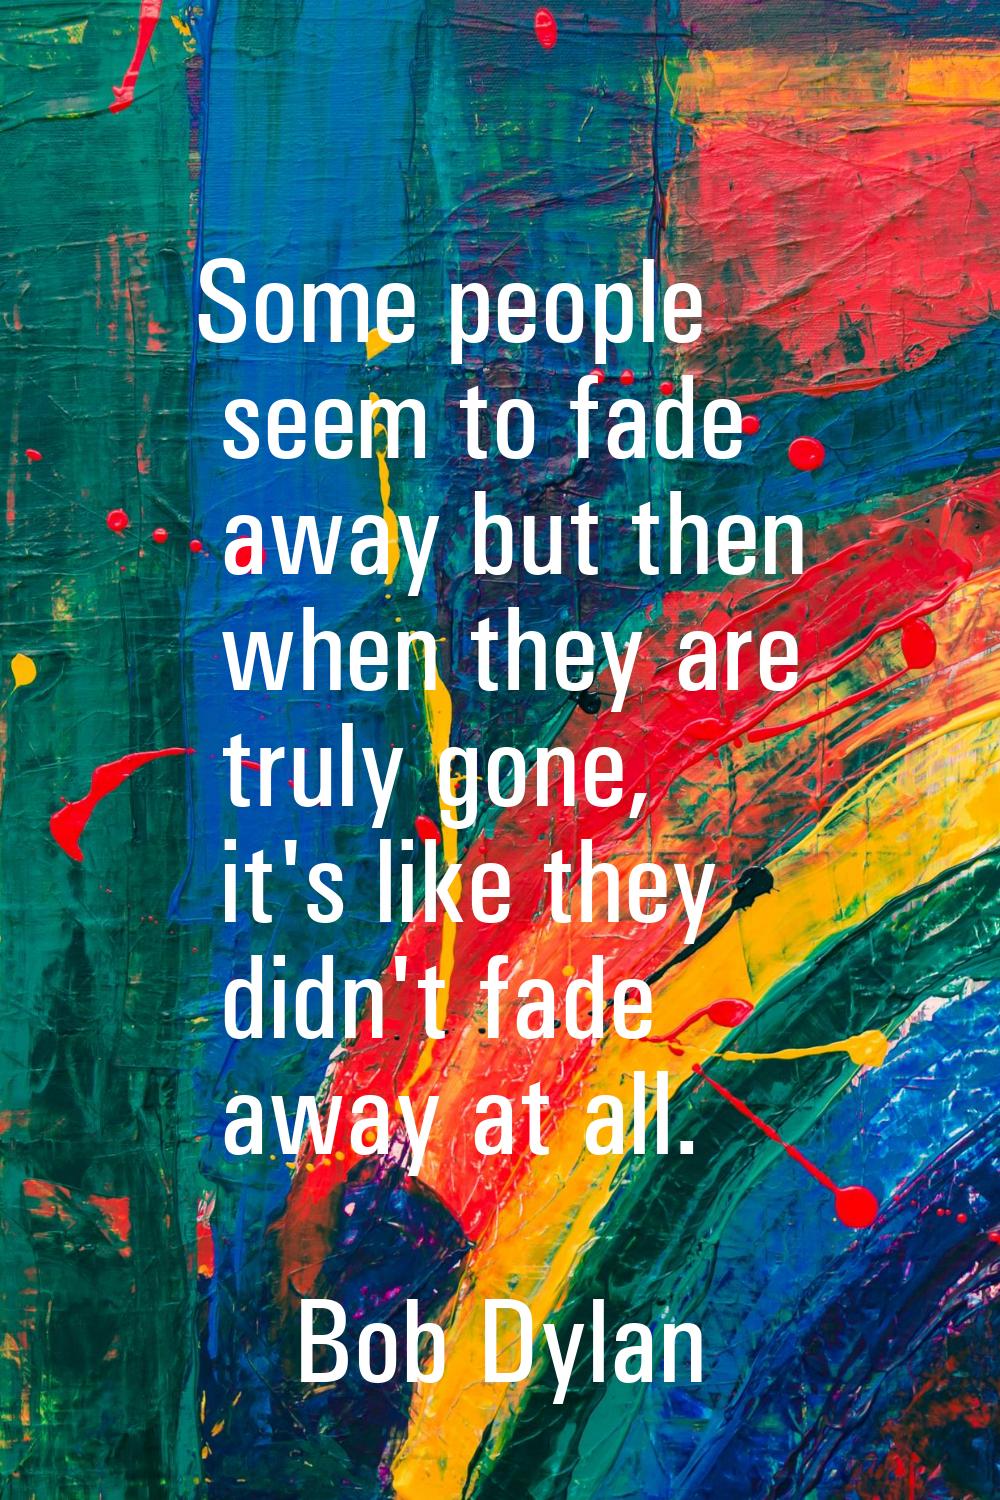 Some people seem to fade away but then when they are truly gone, it's like they didn't fade away at